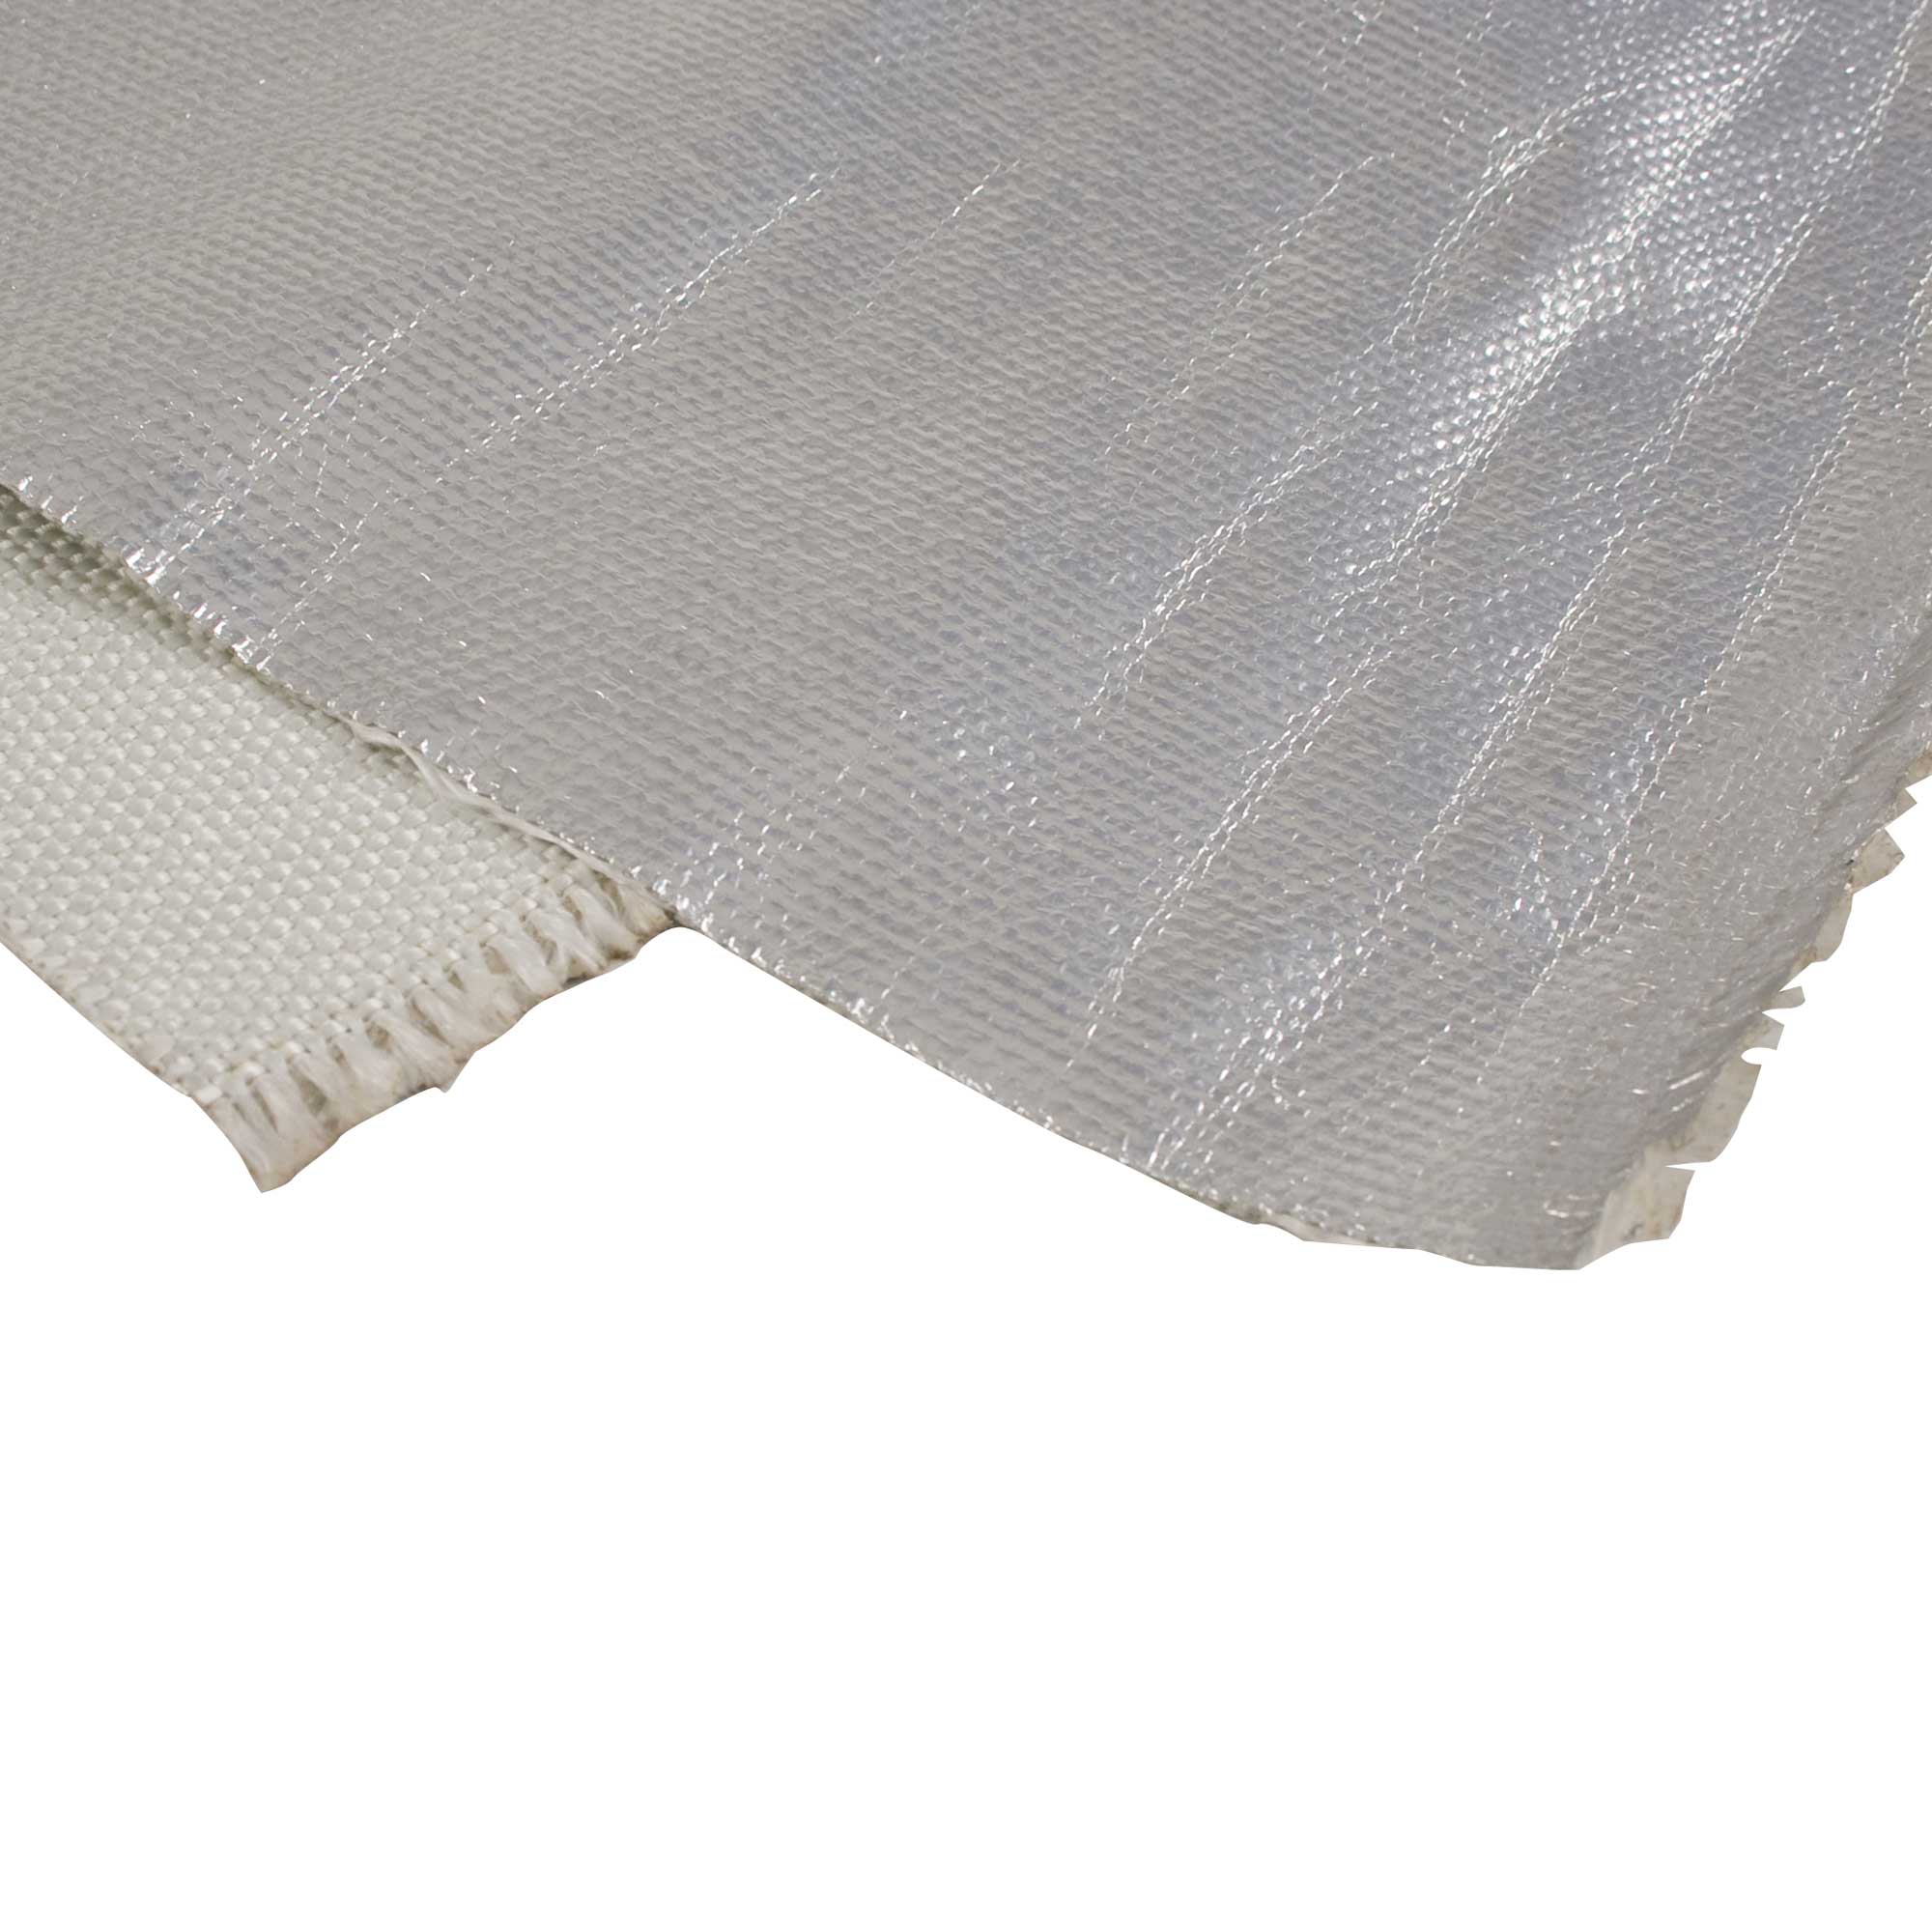 Twin Sided Woven Glass And Aluminium Finish Mocal Heat Resisting Cloth 